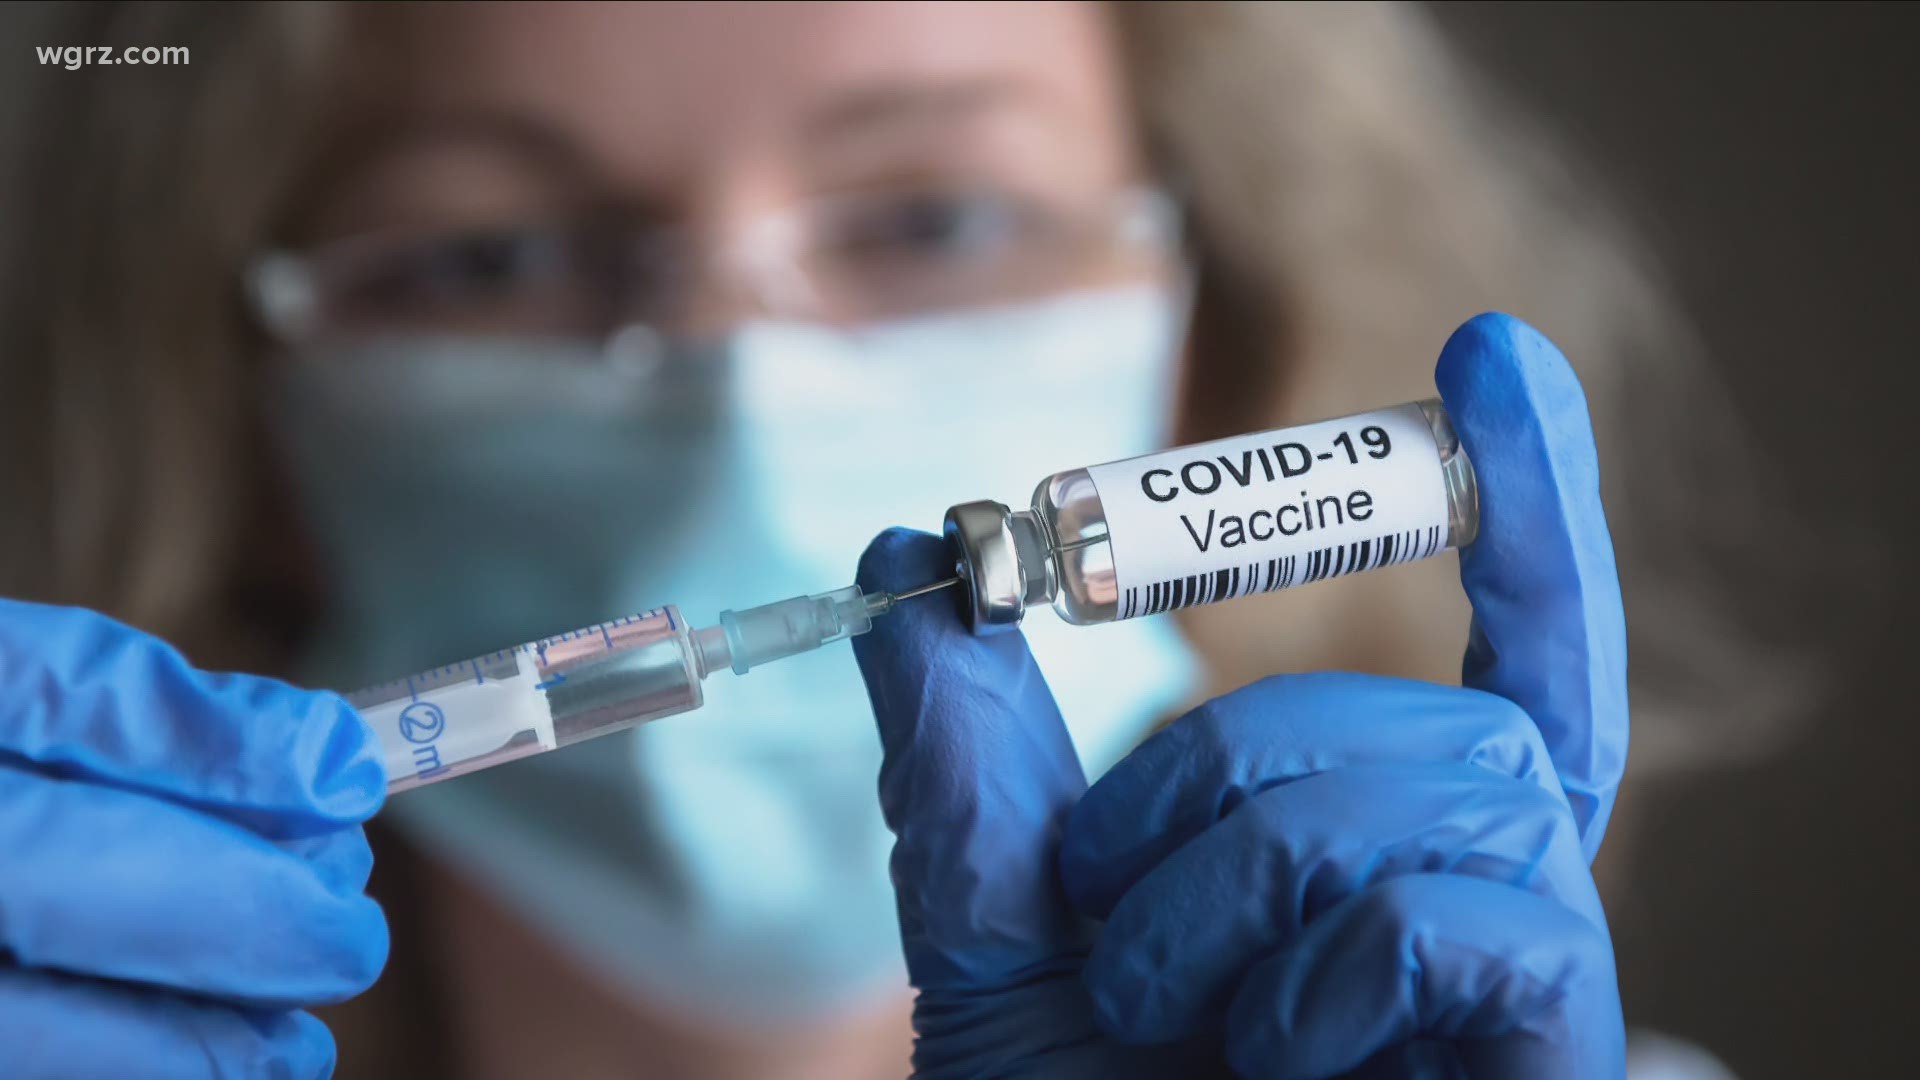 While the state's vaccine tracker breaks down how many doses have been administered in each region, it doesn't give us any information on individual counties.